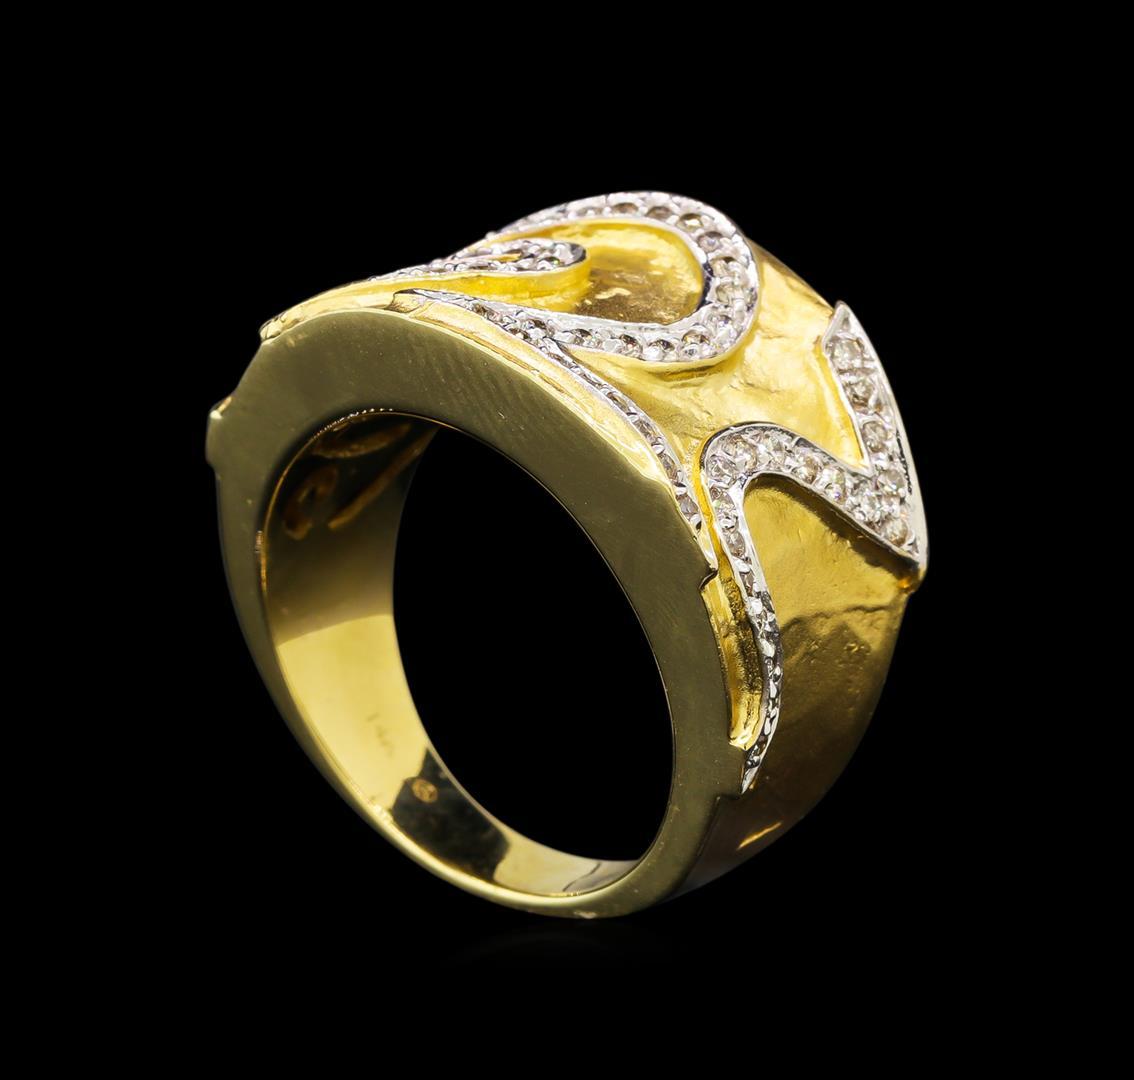 14KT Two-Tone Gold 0.86 ctw Diamond Ring